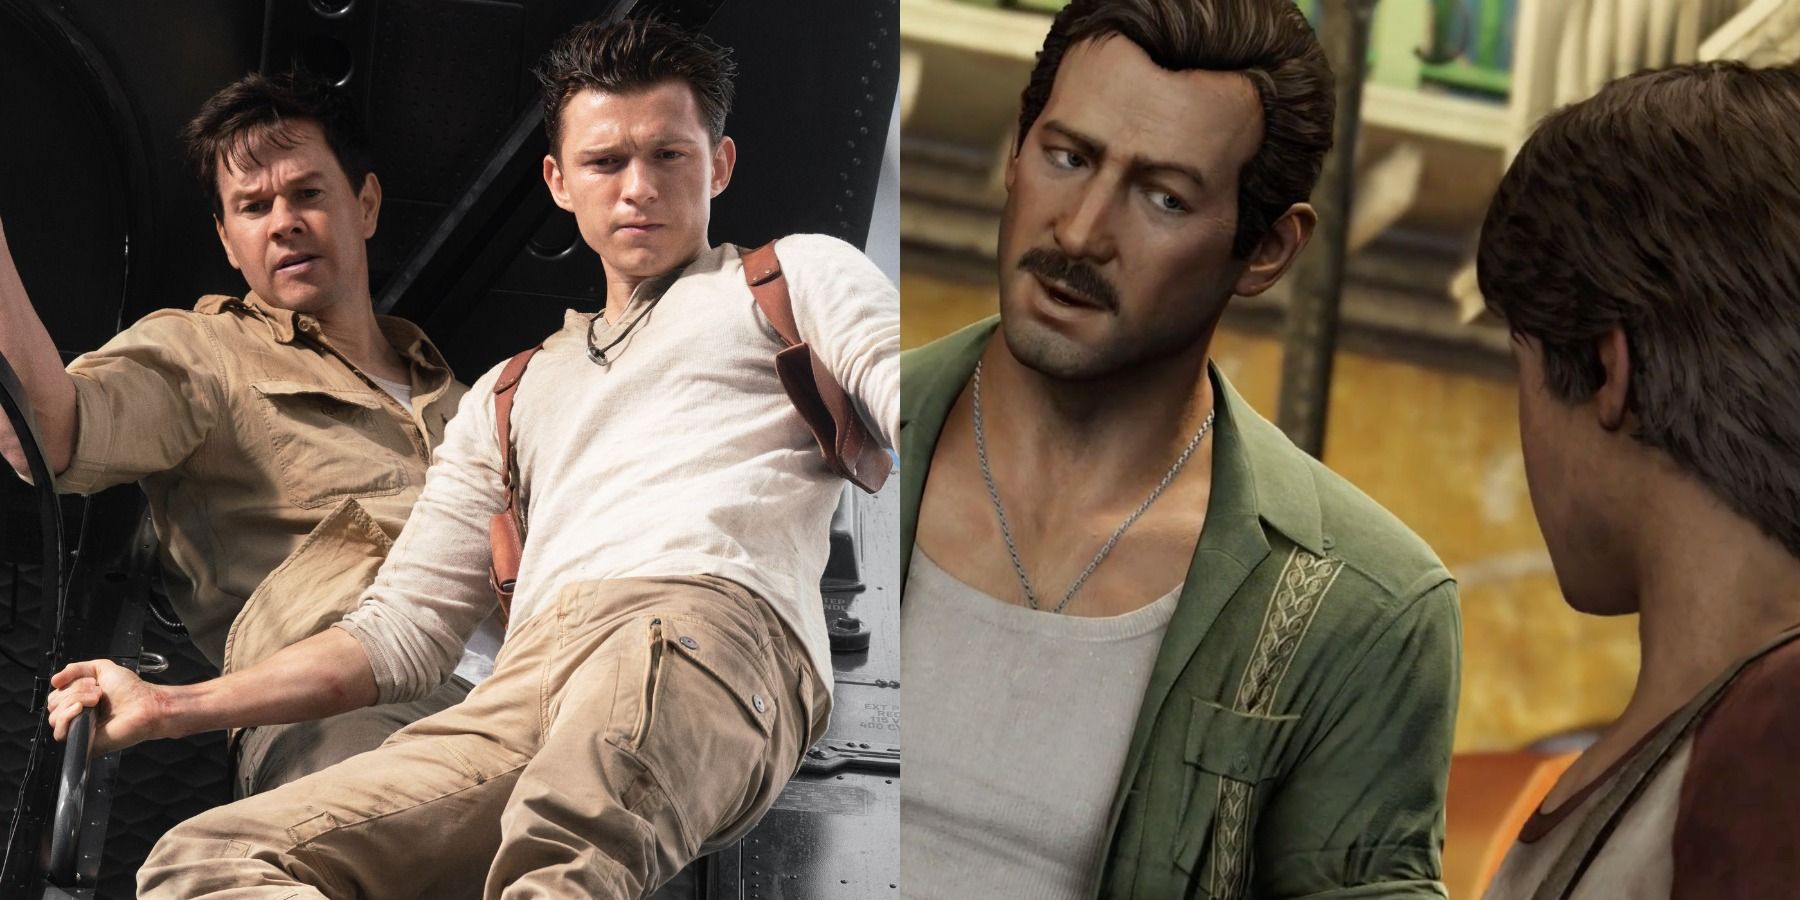 Does Nathan Drake Look Older in Uncharted 3: Drake's Deception?